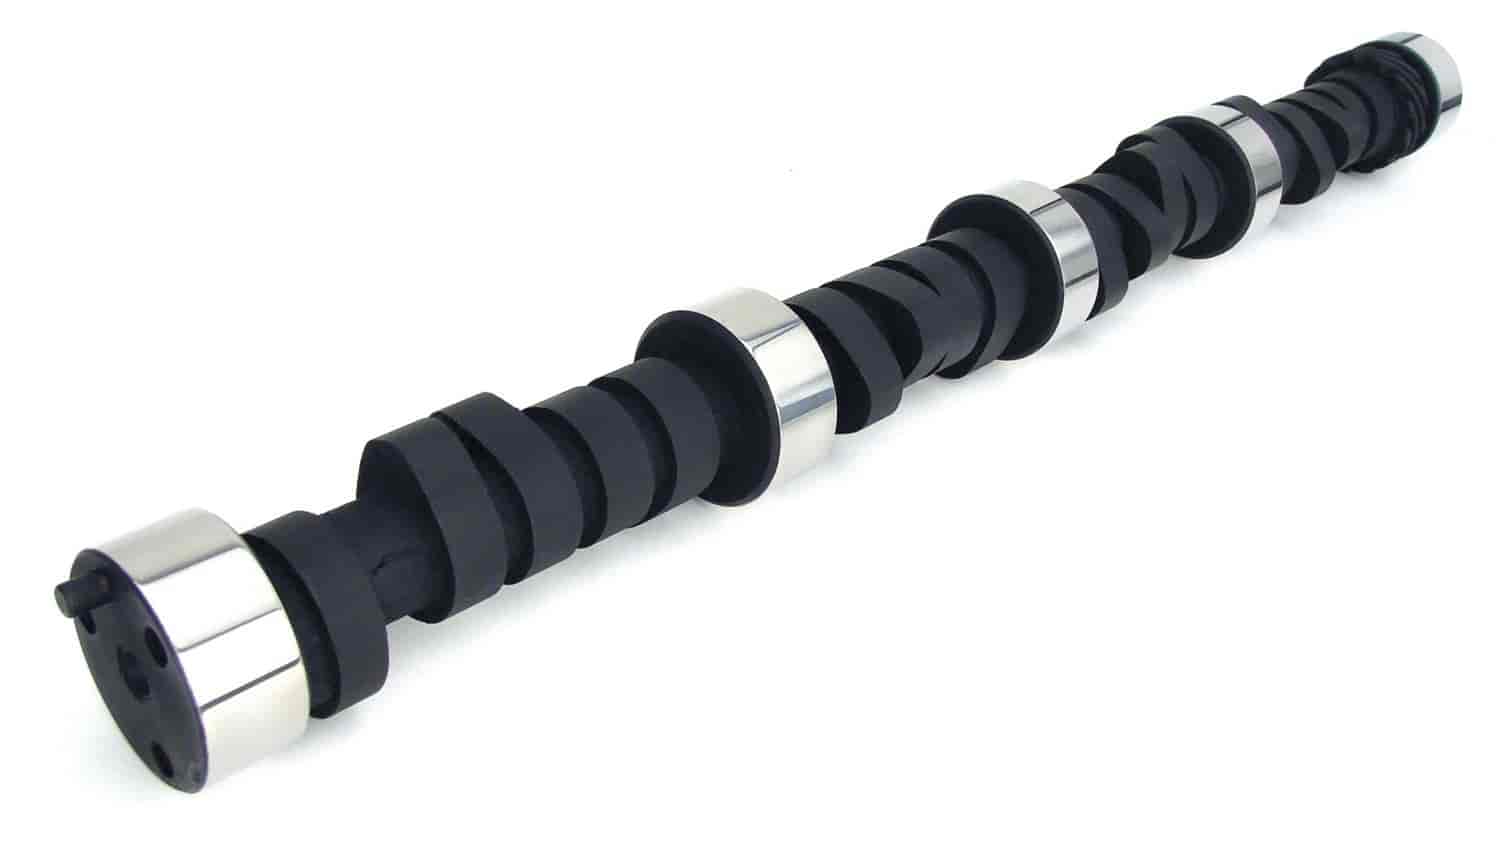 Xtreme Energy 294H Hydraulic Flat Tappet Camshaft Only Lift: .519"/.523" Duration: 294°/306° RPM Range: 2800-7000